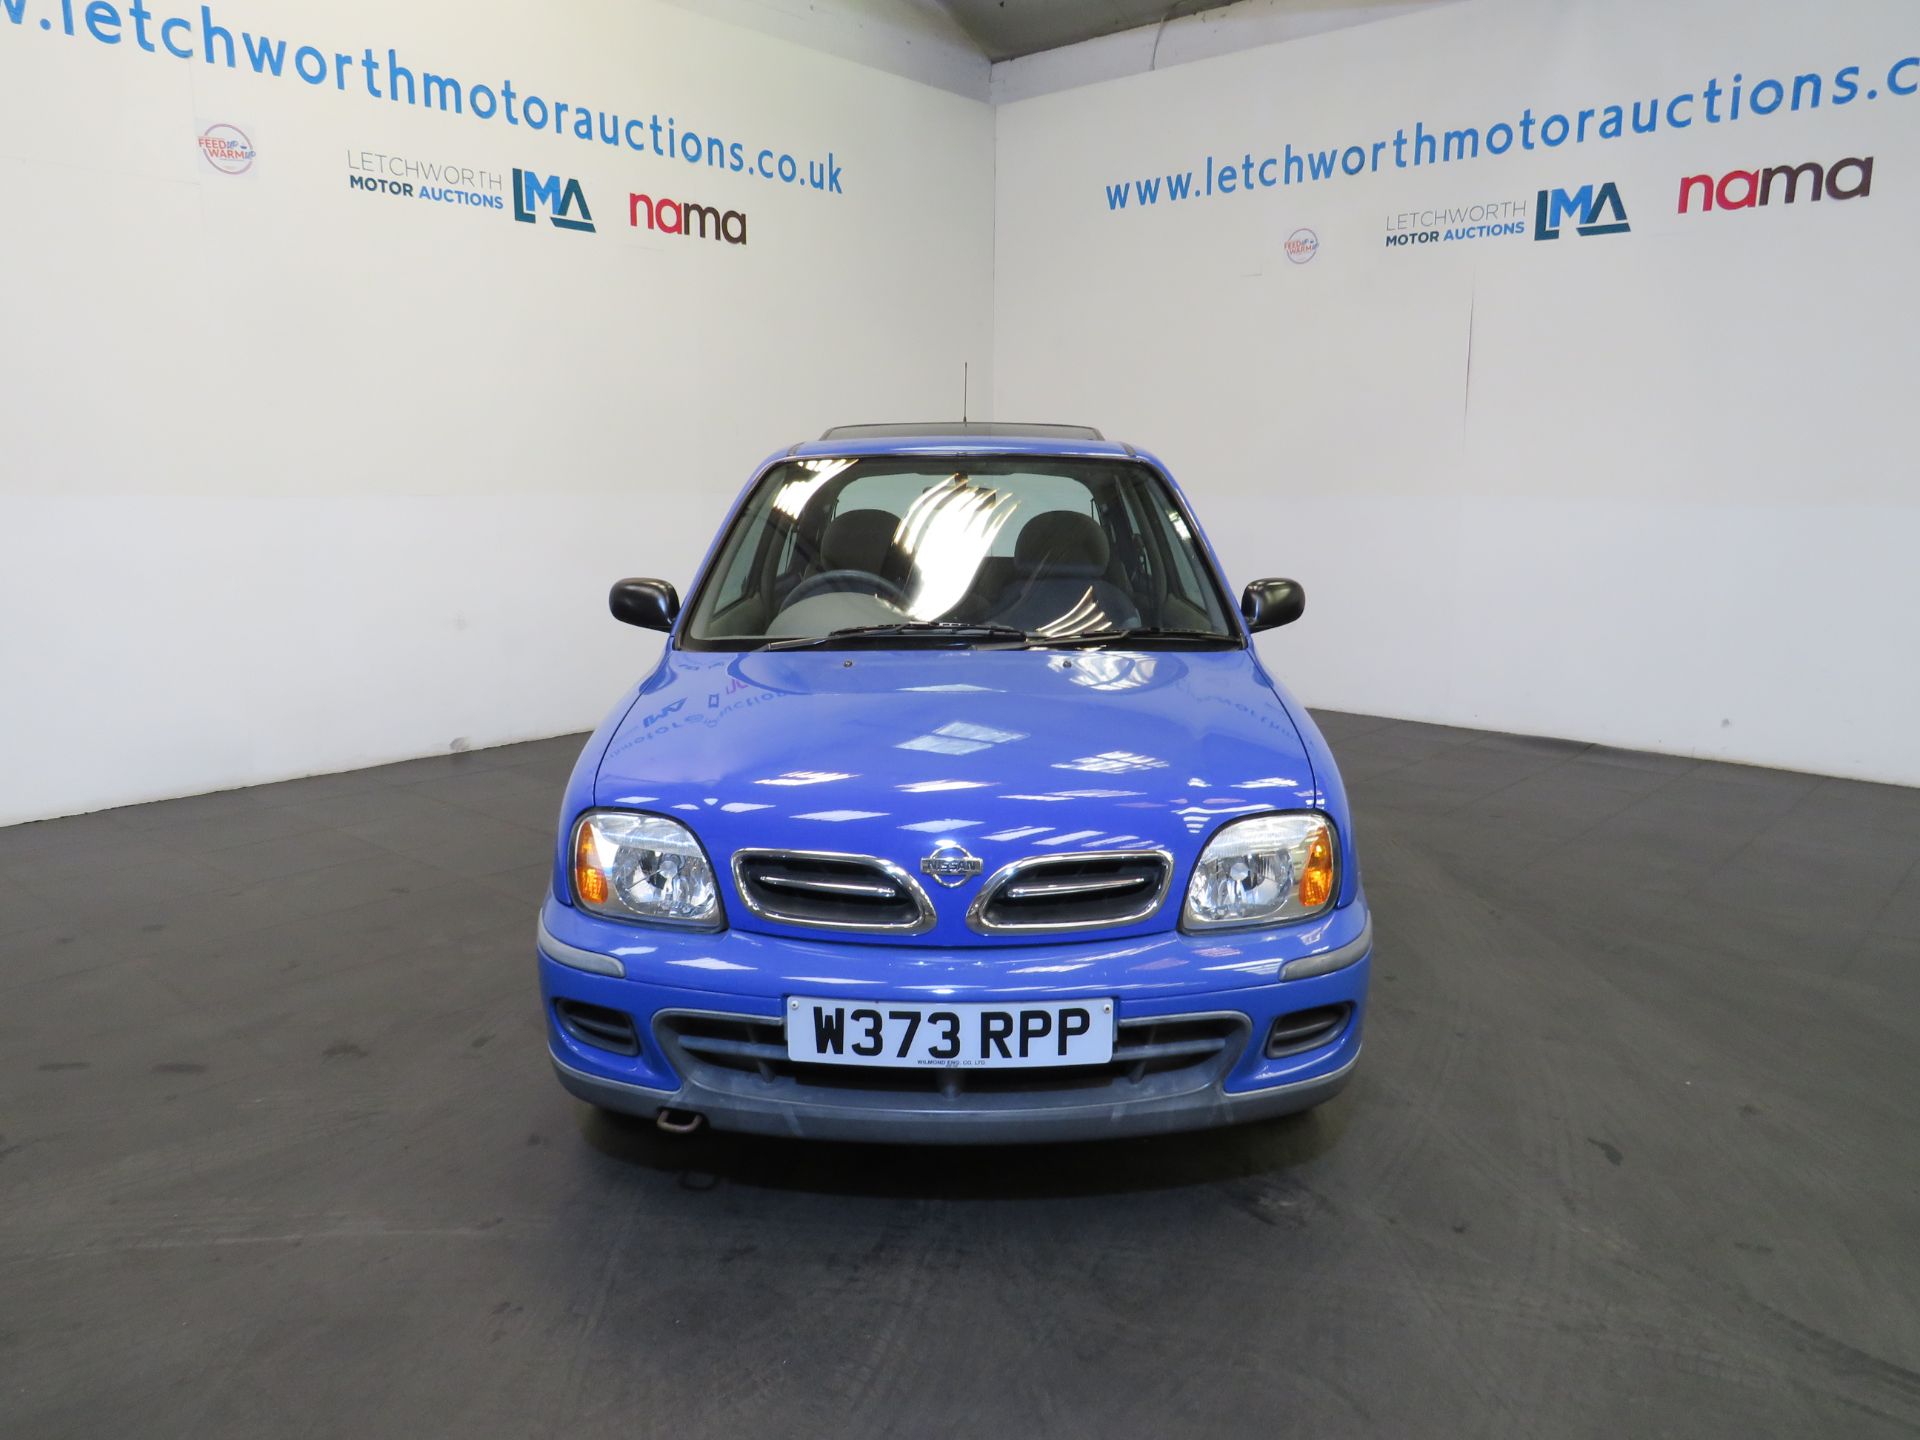 2000 Nissan Micra S - 998cc - Image 2 of 15